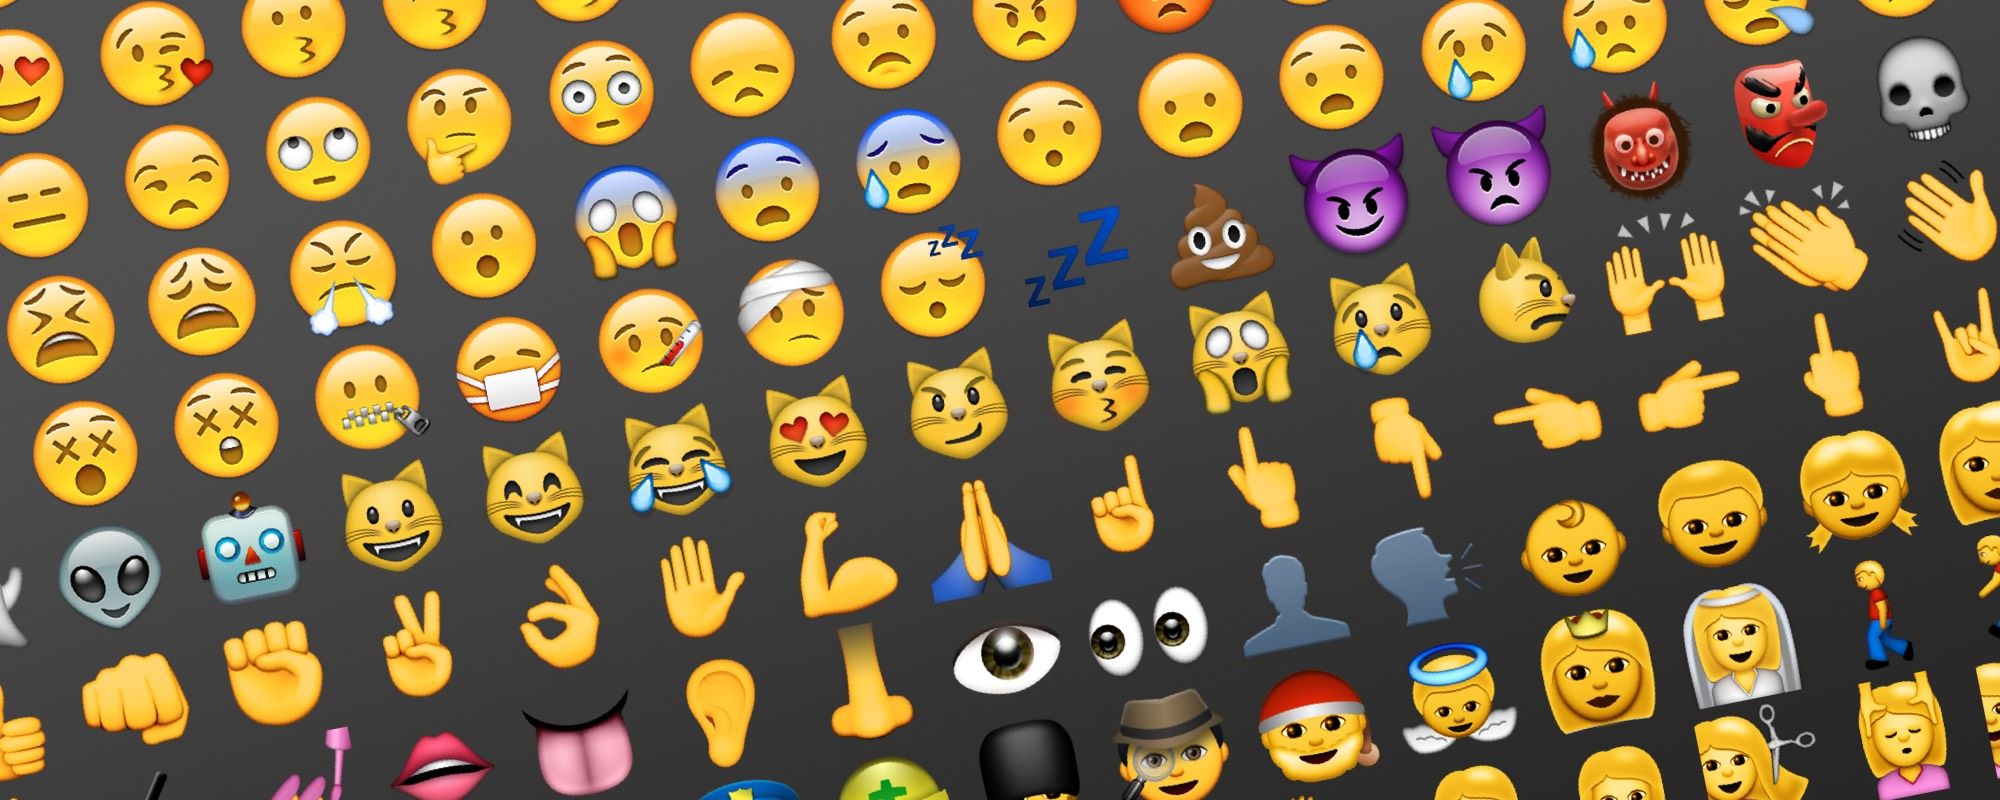 "Emojis" on the Rise as Plural